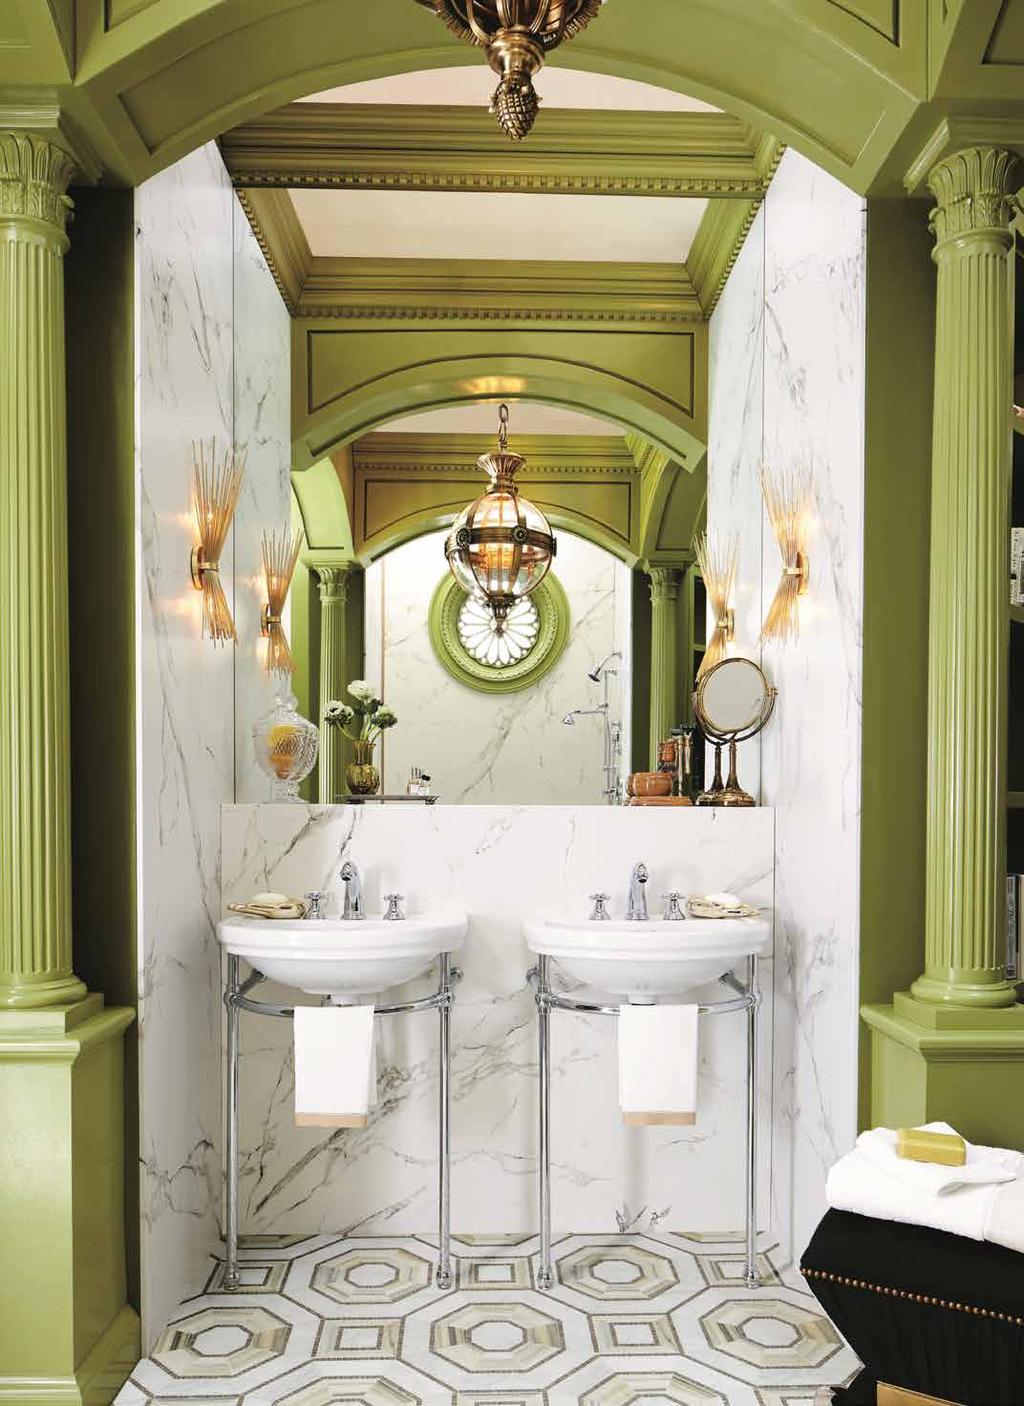 Influenced by the architecture of the city of Florence, Jenkins designed this bathroom for American Standard DVX Fashion and design are like two peas in a pod.